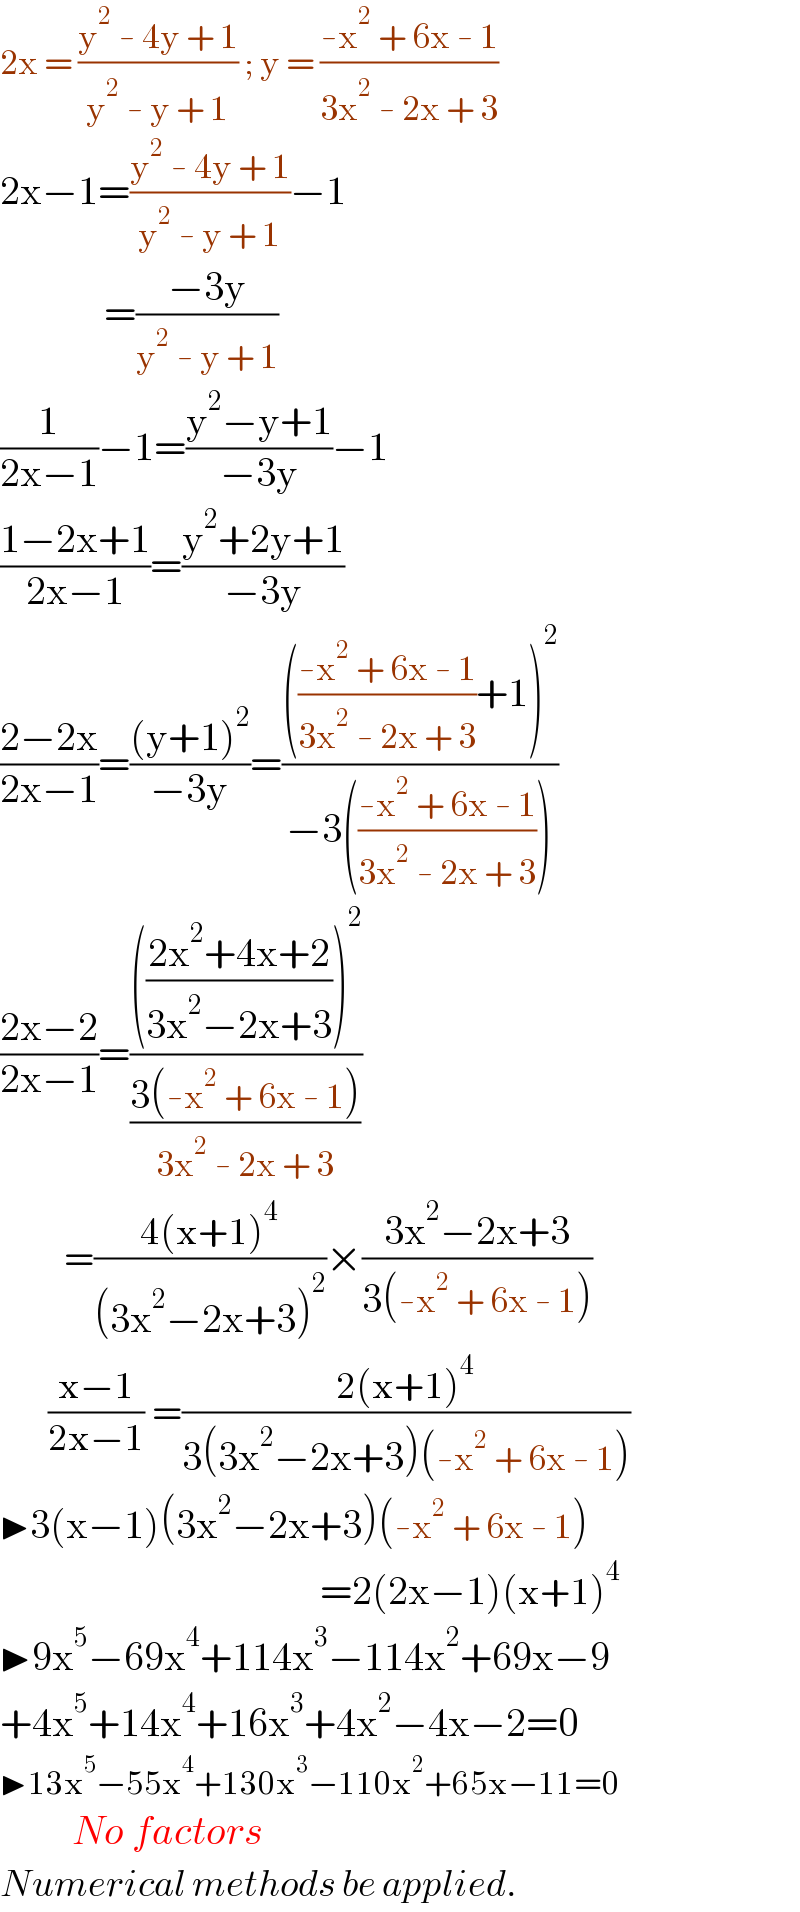 2x = ((y^2  - 4y + 1)/(y^2  - y + 1)) ; y = ((-x^2  + 6x - 1)/(3x^2  - 2x + 3))  2x−1=((y^2  - 4y + 1)/(y^2  - y + 1))−1               =((−3y)/(y^2  - y + 1))  (1/(2x−1))−1=((y^2 −y+1)/(−3y))−1  ((1−2x+1)/(2x−1))=((y^2 +2y+1)/(−3y))  ((2−2x)/(2x−1))=(((y+1)^2 )/(−3y))=(((((-x^2  + 6x - 1)/(3x^2  - 2x + 3))+1)^2 )/(−3(((-x^2  + 6x - 1)/(3x^2  - 2x + 3)))))  ((2x−2)/(2x−1))=(((((2x^2 +4x+2)/(3x^2 −2x+3)))^2 )/((3(-x^2  + 6x - 1))/(3x^2  - 2x + 3)))          =((4(x+1)^4 )/((3x^2 −2x+3)^2 ))×((3x^2 −2x+3)/(3(-x^2  + 6x - 1)))        ((x−1)/(2x−1)) =((2(x+1)^4 )/(3(3x^2 −2x+3)(-x^2  + 6x - 1)))  ▶3(x−1)(3x^2 −2x+3)(-x^2  + 6x - 1)                                          =2(2x−1)(x+1)^4   ▶9x^5 −69x^4 +114x^3 −114x^2 +69x−9  +4x^5 +14x^4 +16x^3 +4x^2 −4x−2=0  ▶13x^5 −55x^4 +130x^3 −110x^2 +65x−11=0           No factors  Numerical methods be applied.  